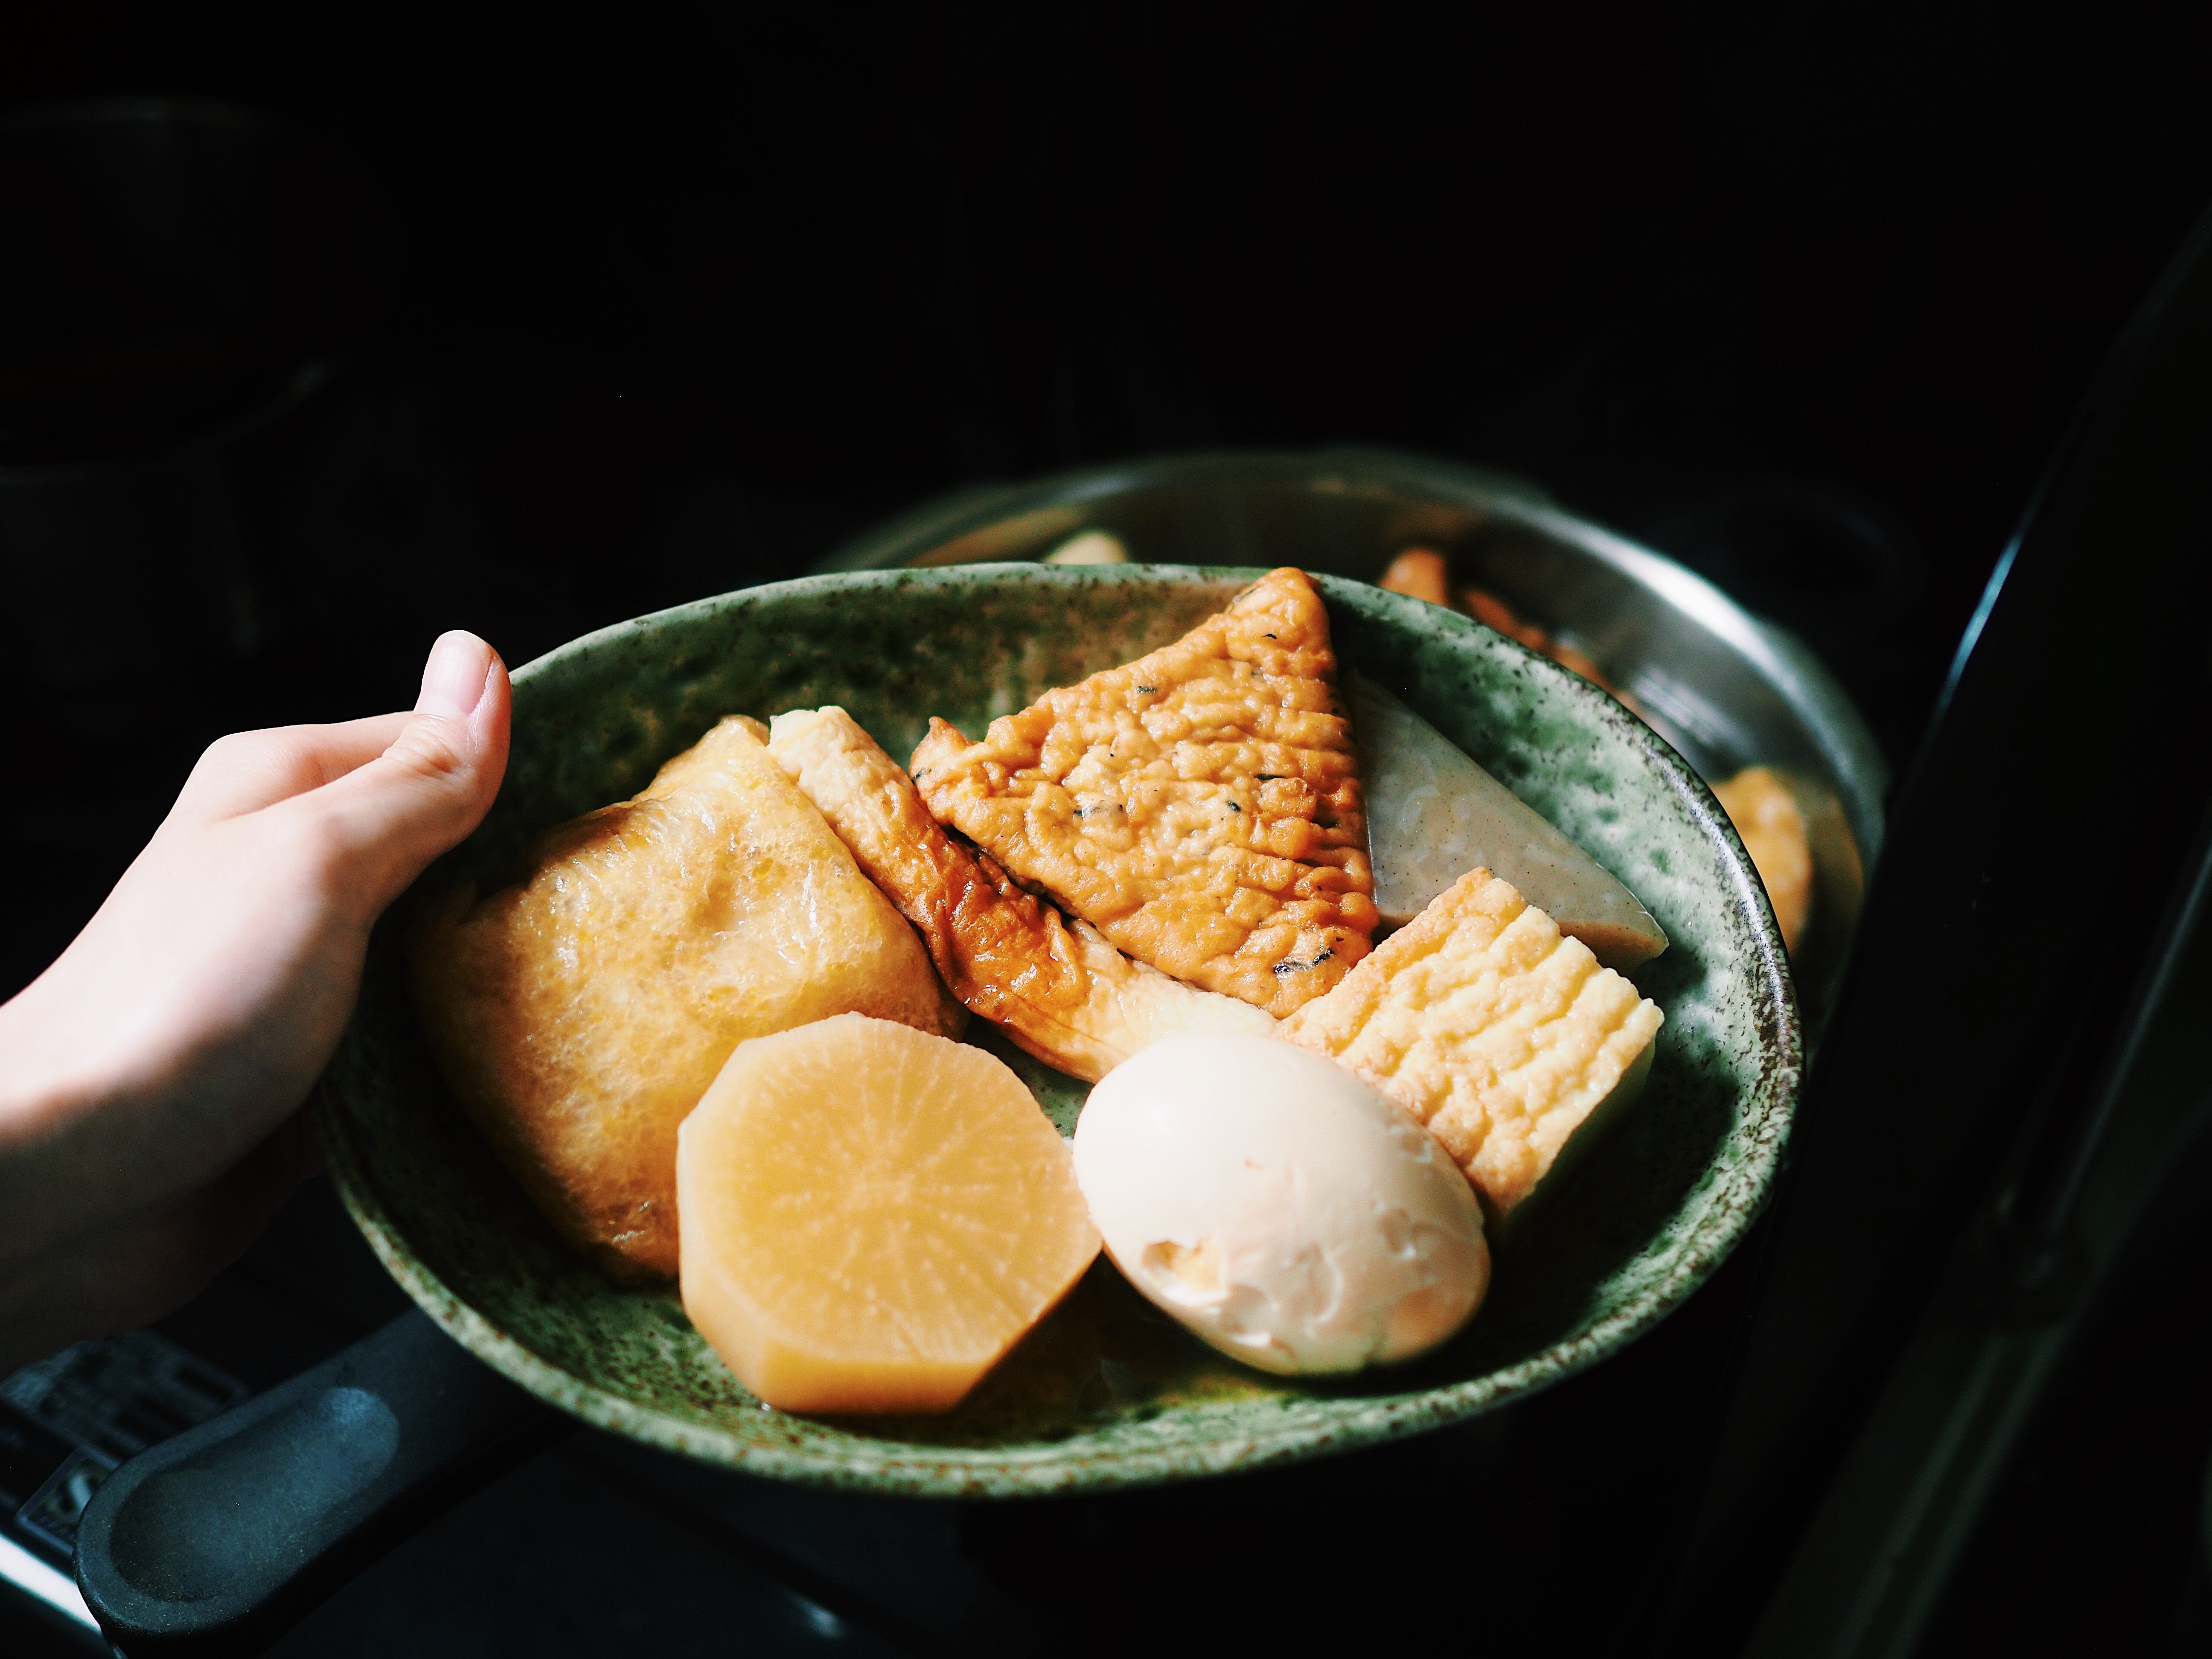 How to savour a Japanese winter: An ode to 'oden